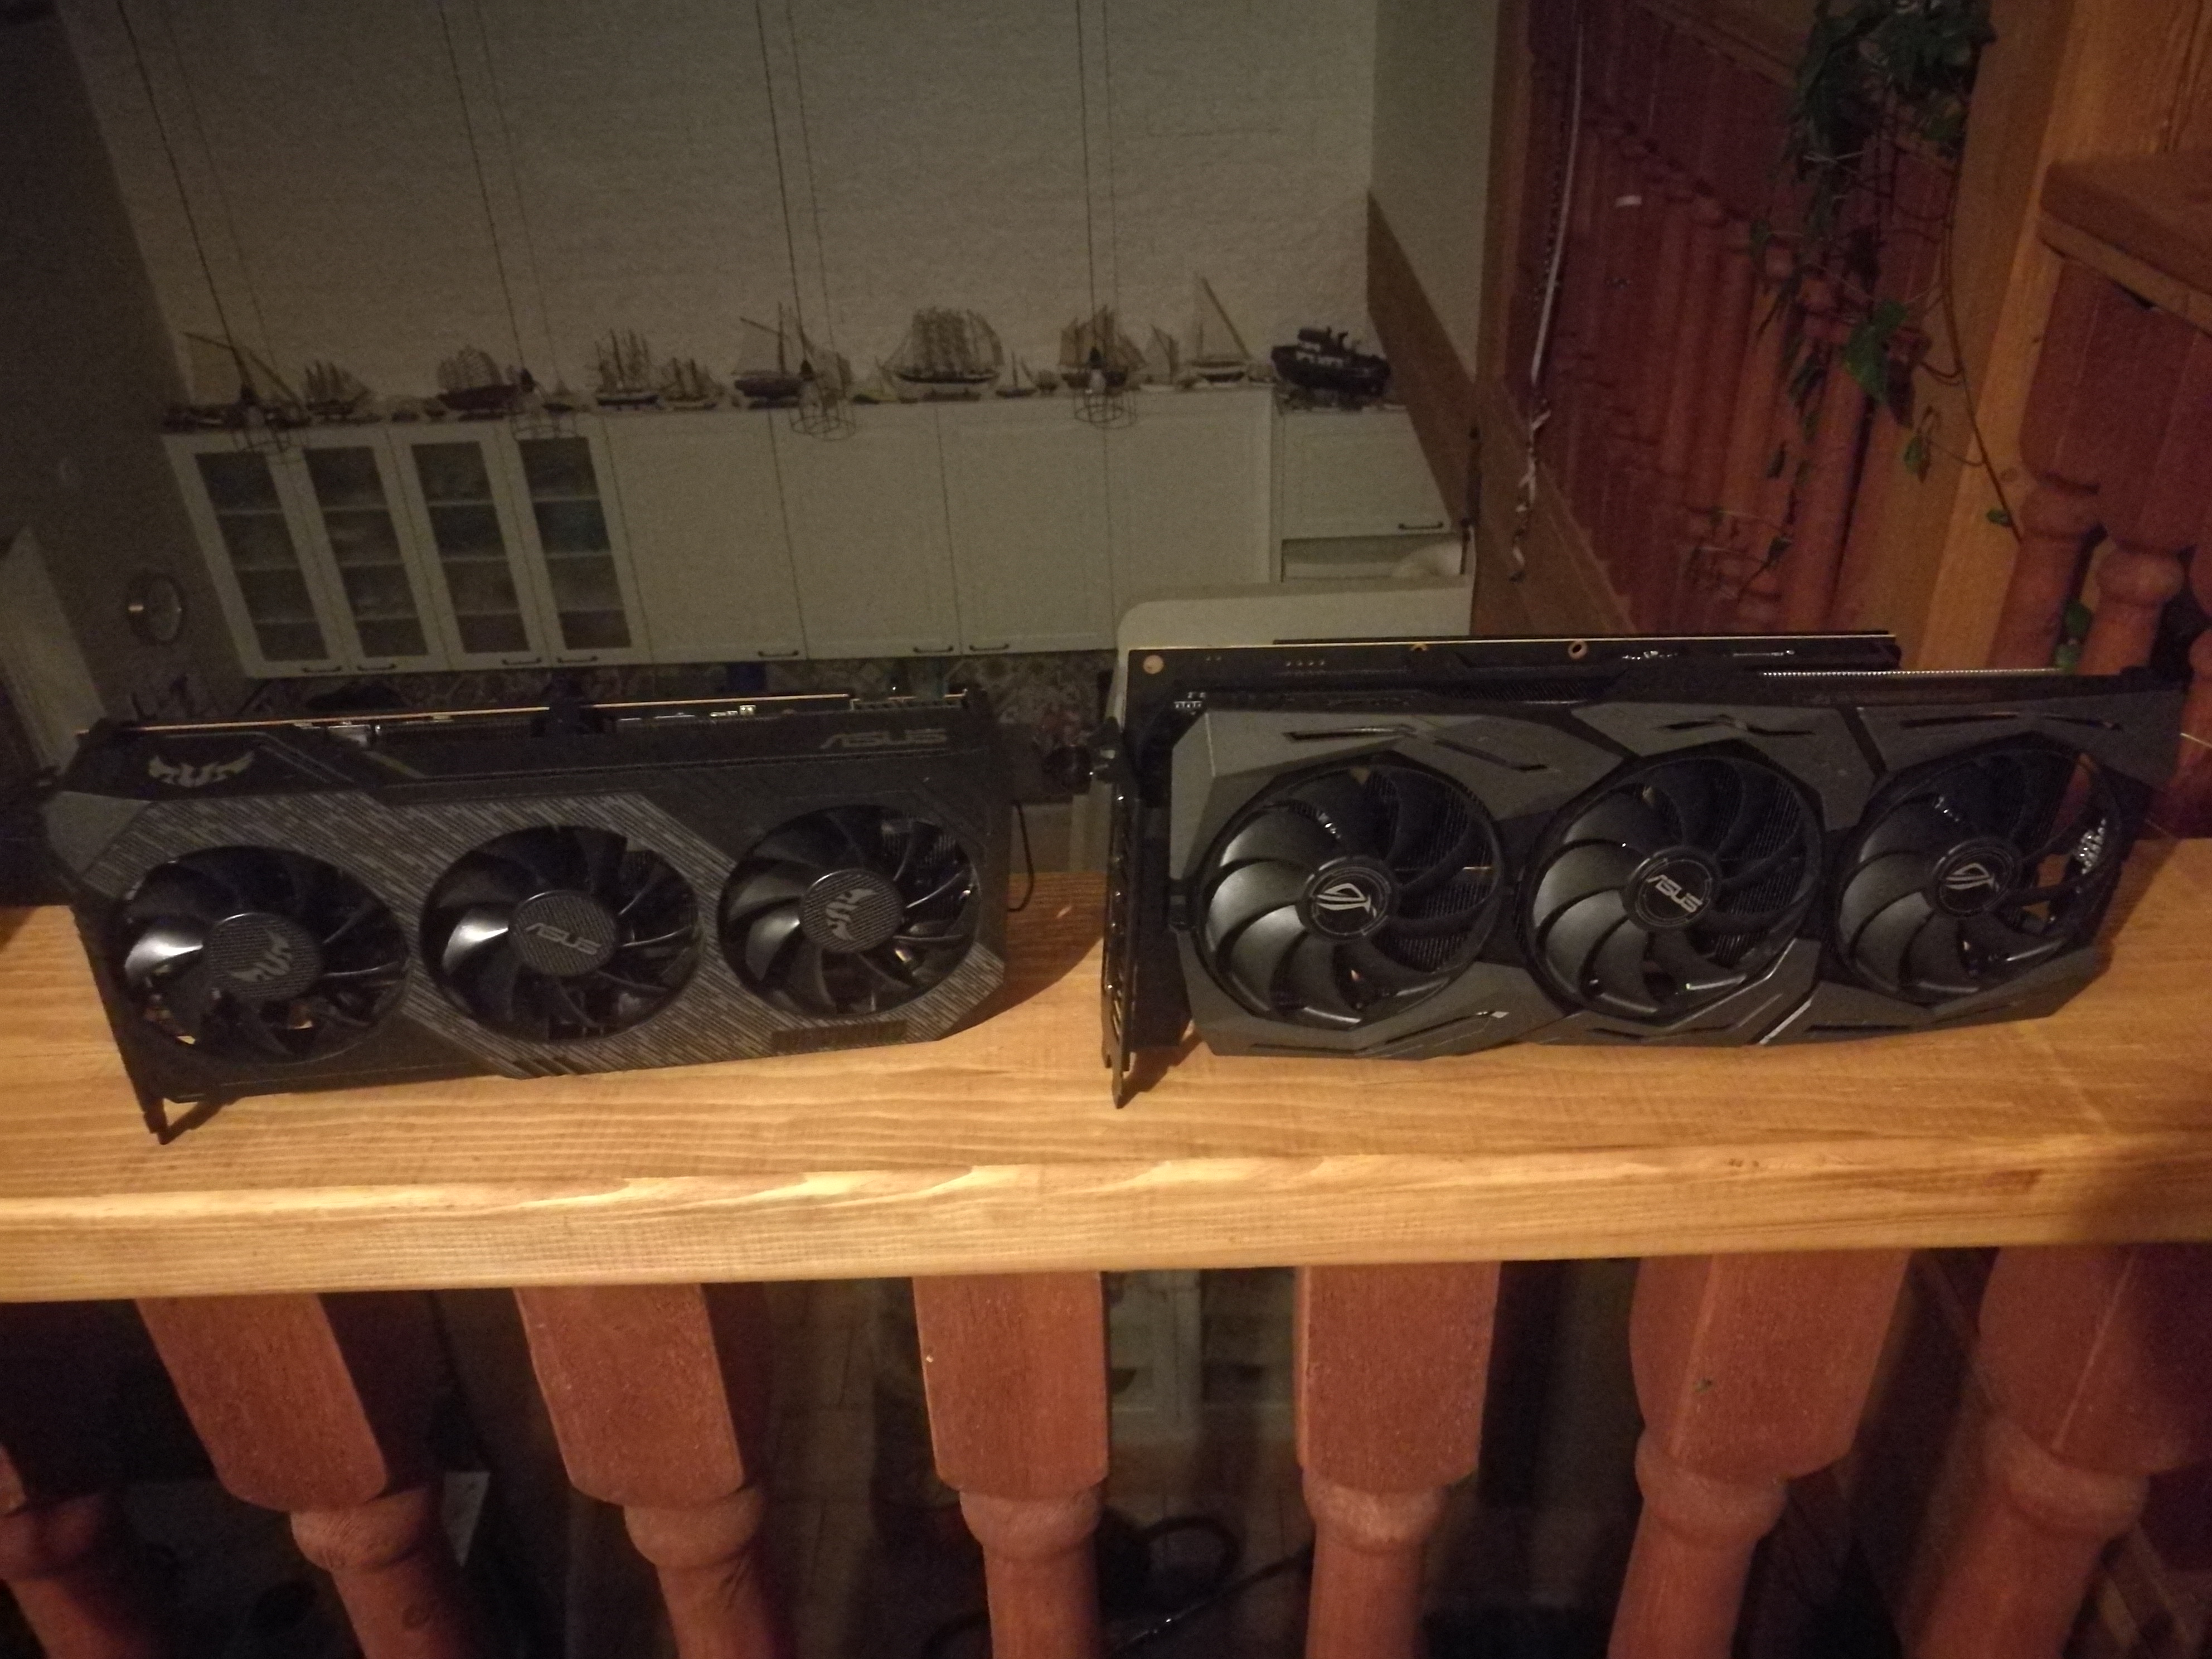 RX5700s